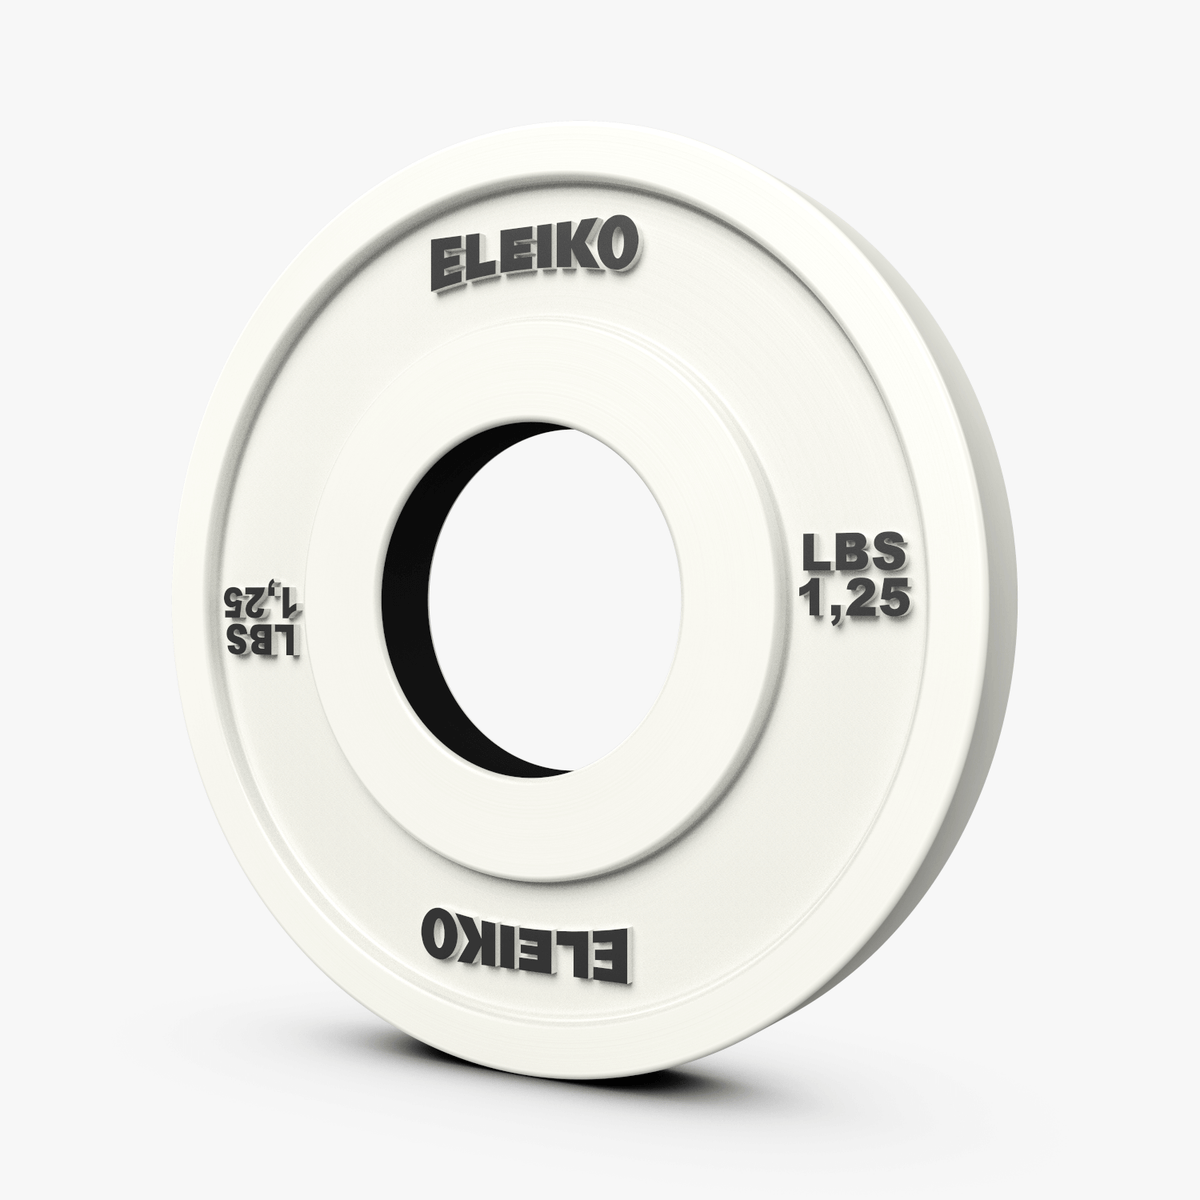 ELEIKO OLYMPIC WEIGHTLIFTING TRAINING PLATES — Rubber Coated-in Lbs